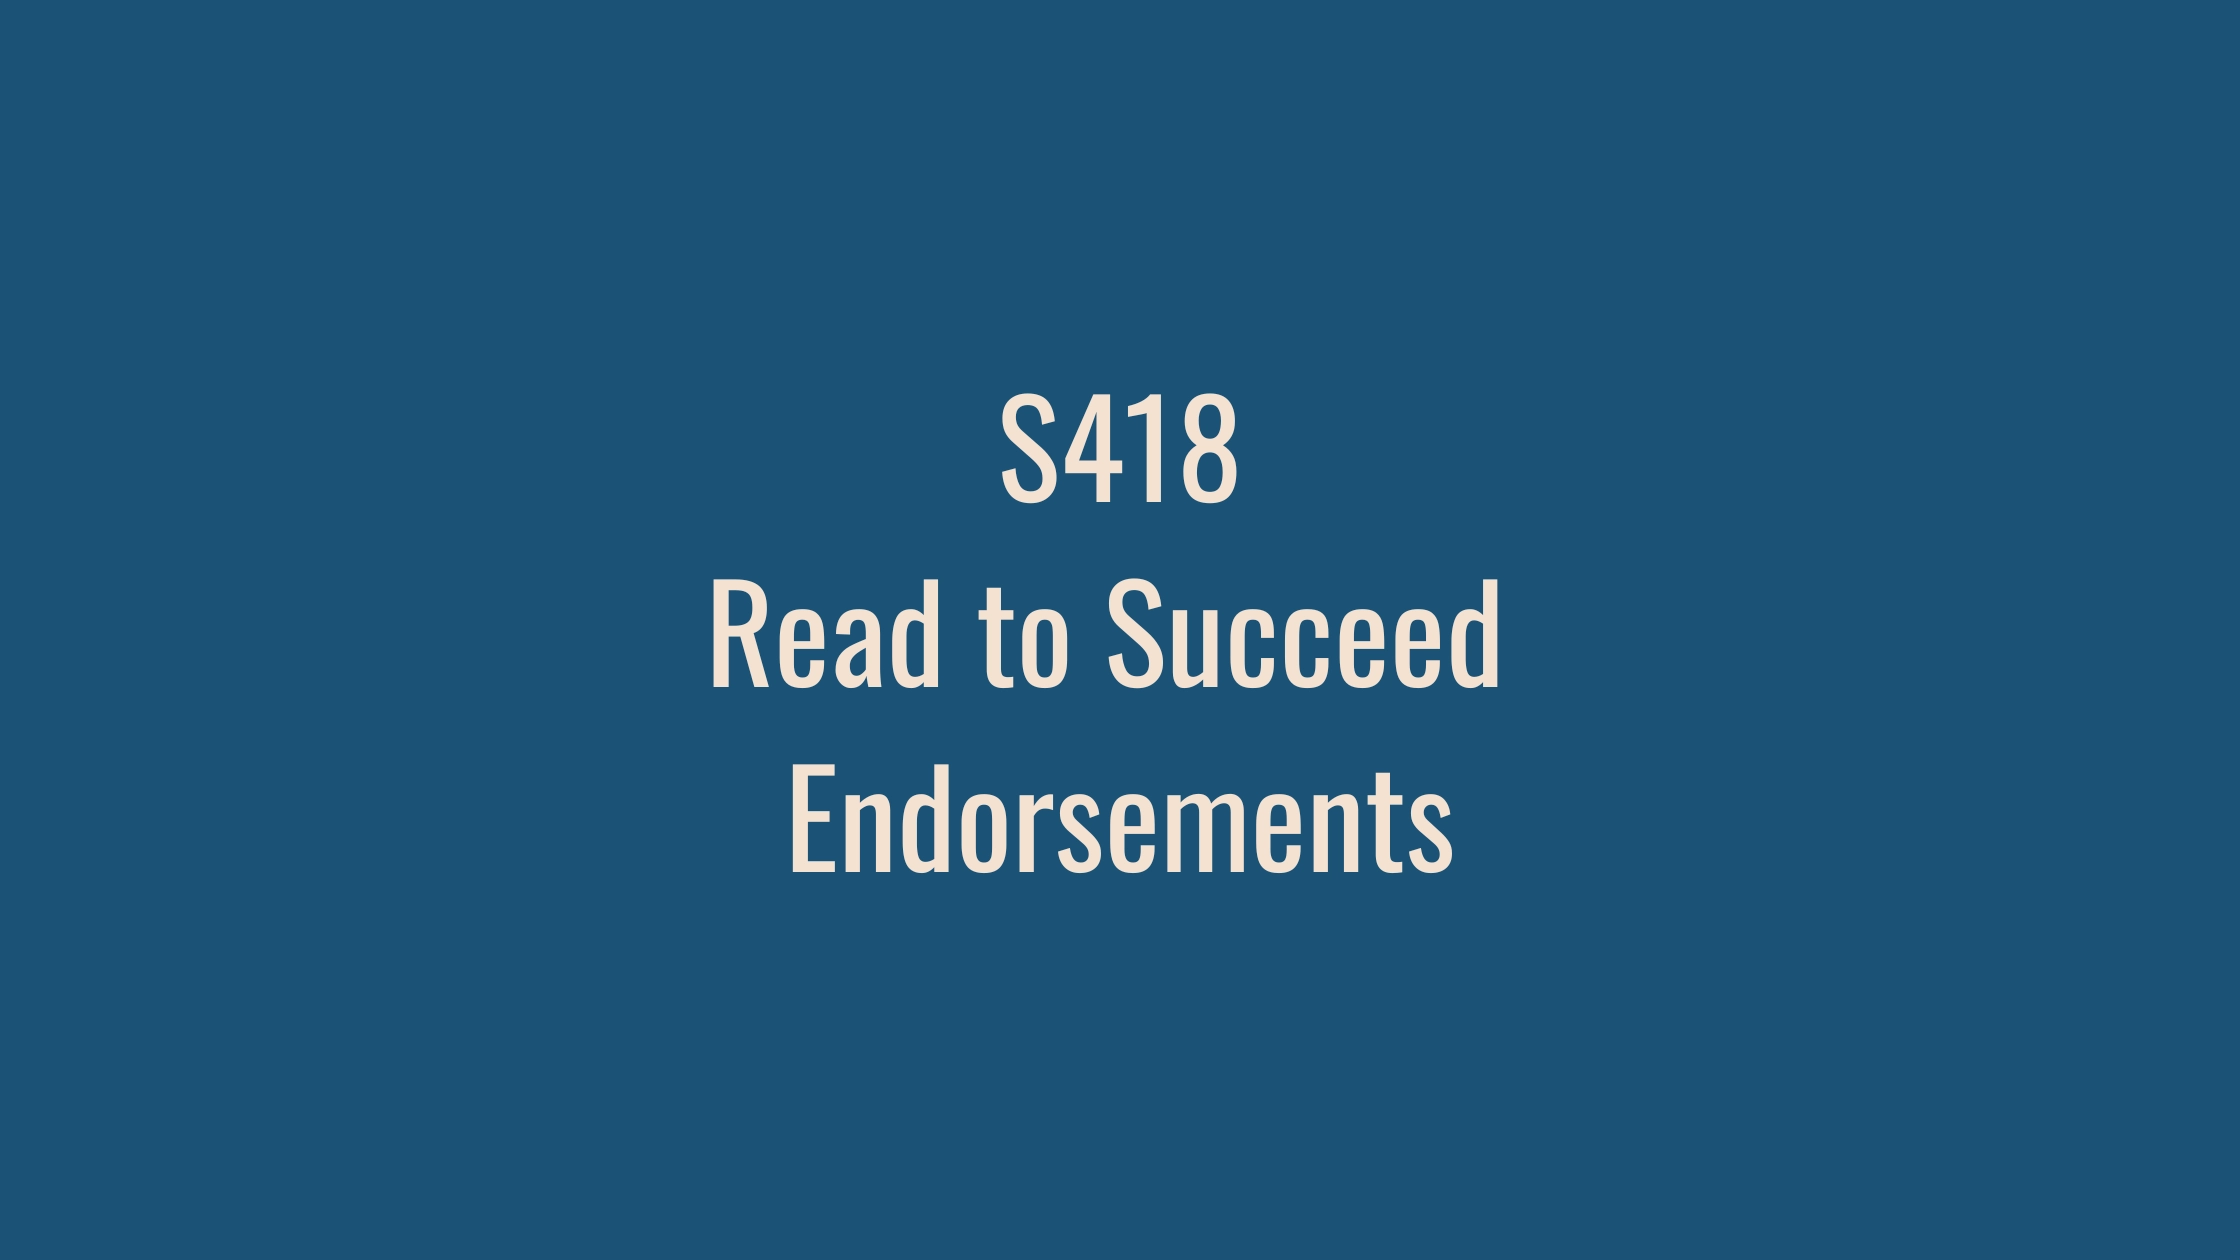 S418: Read to Succeed Endorsements